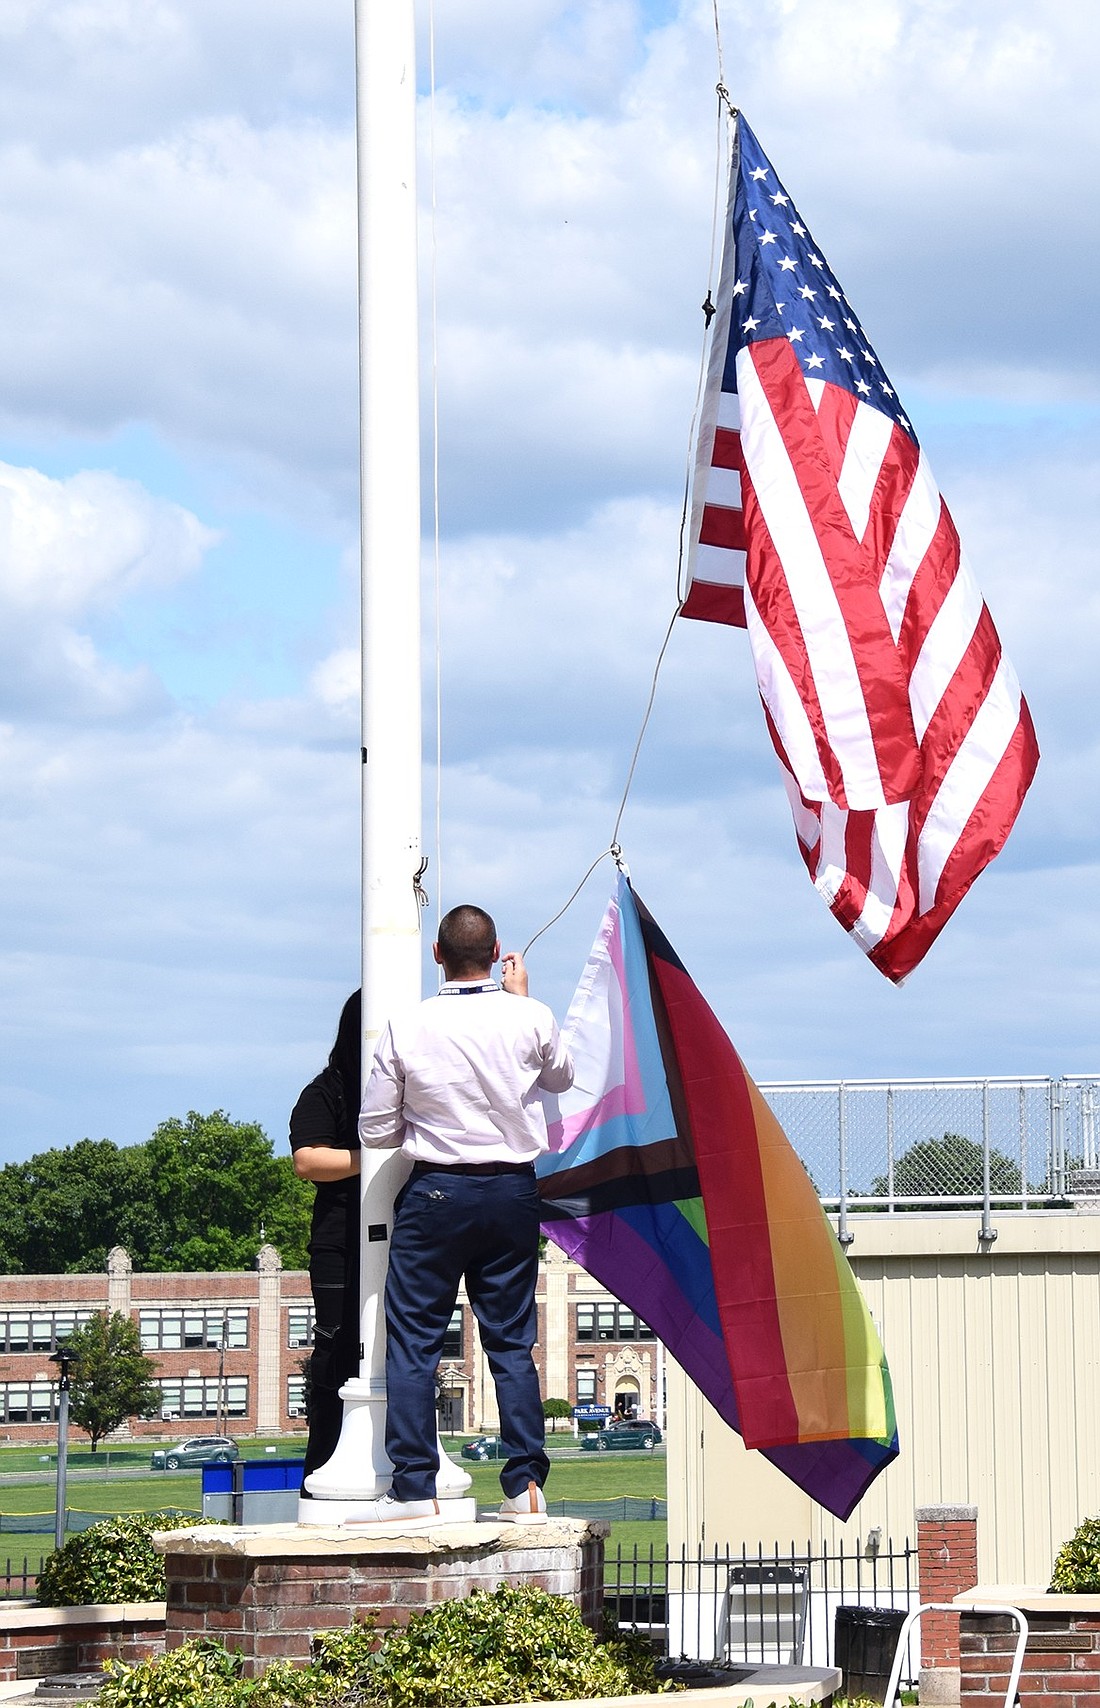 Port Chester High School Principal Luke Sotherden works in tandem with a member of the Gay-Straight Alliance to raise the Pride flag in front of the building on Thursday, May 30, to commemorate the start of Pride Month, recognized throughout June.